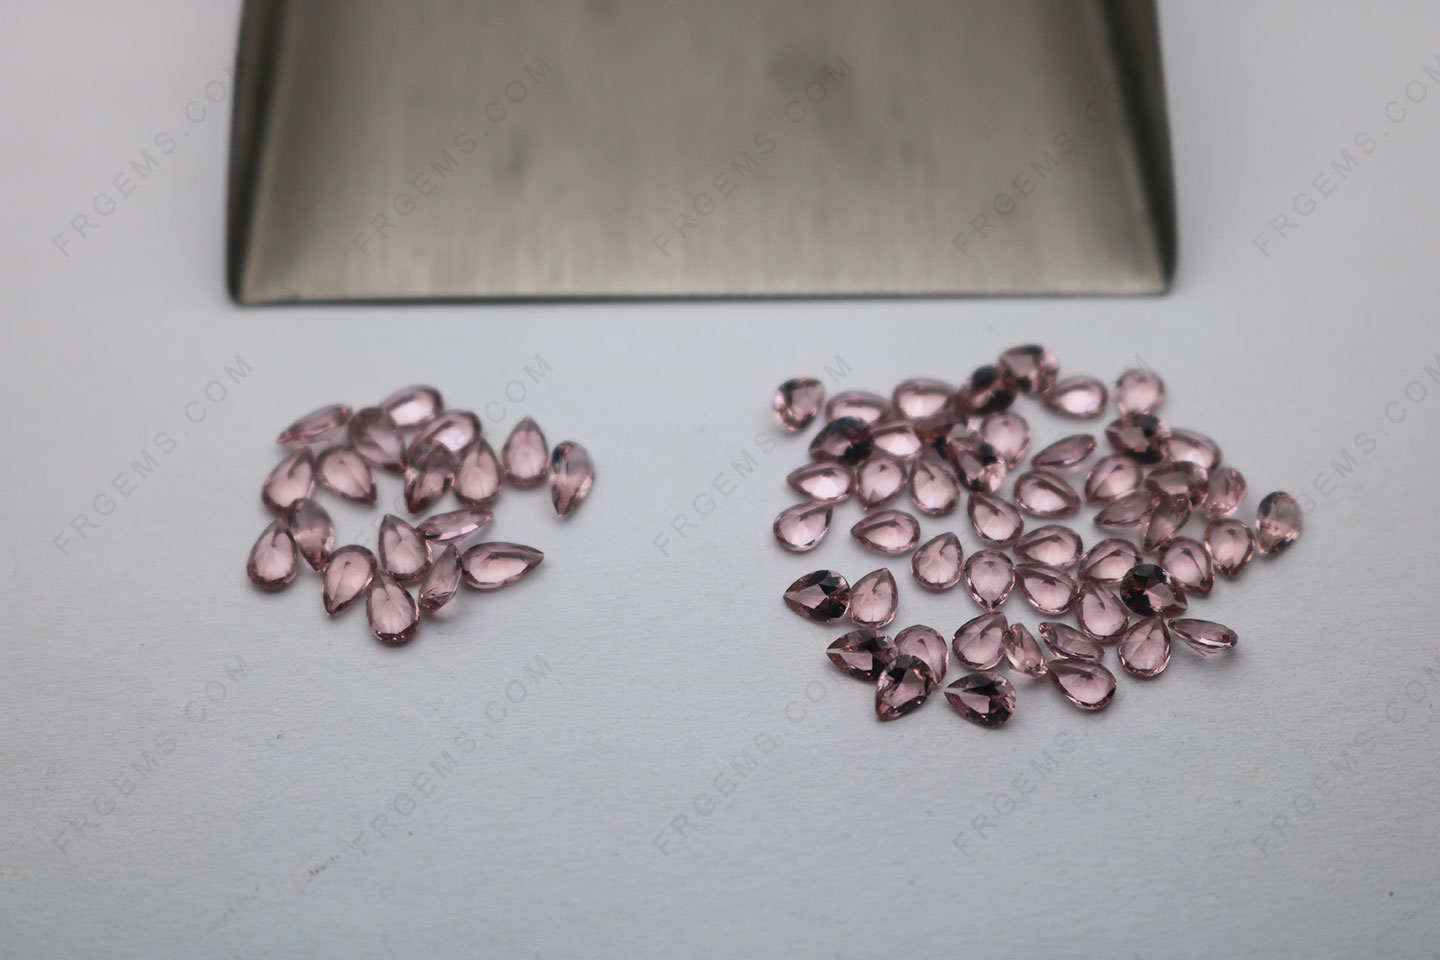 Nano Crystal Morganite 182# Color Pear shape faceted cut 3x5mm and 3x4mm gemstones